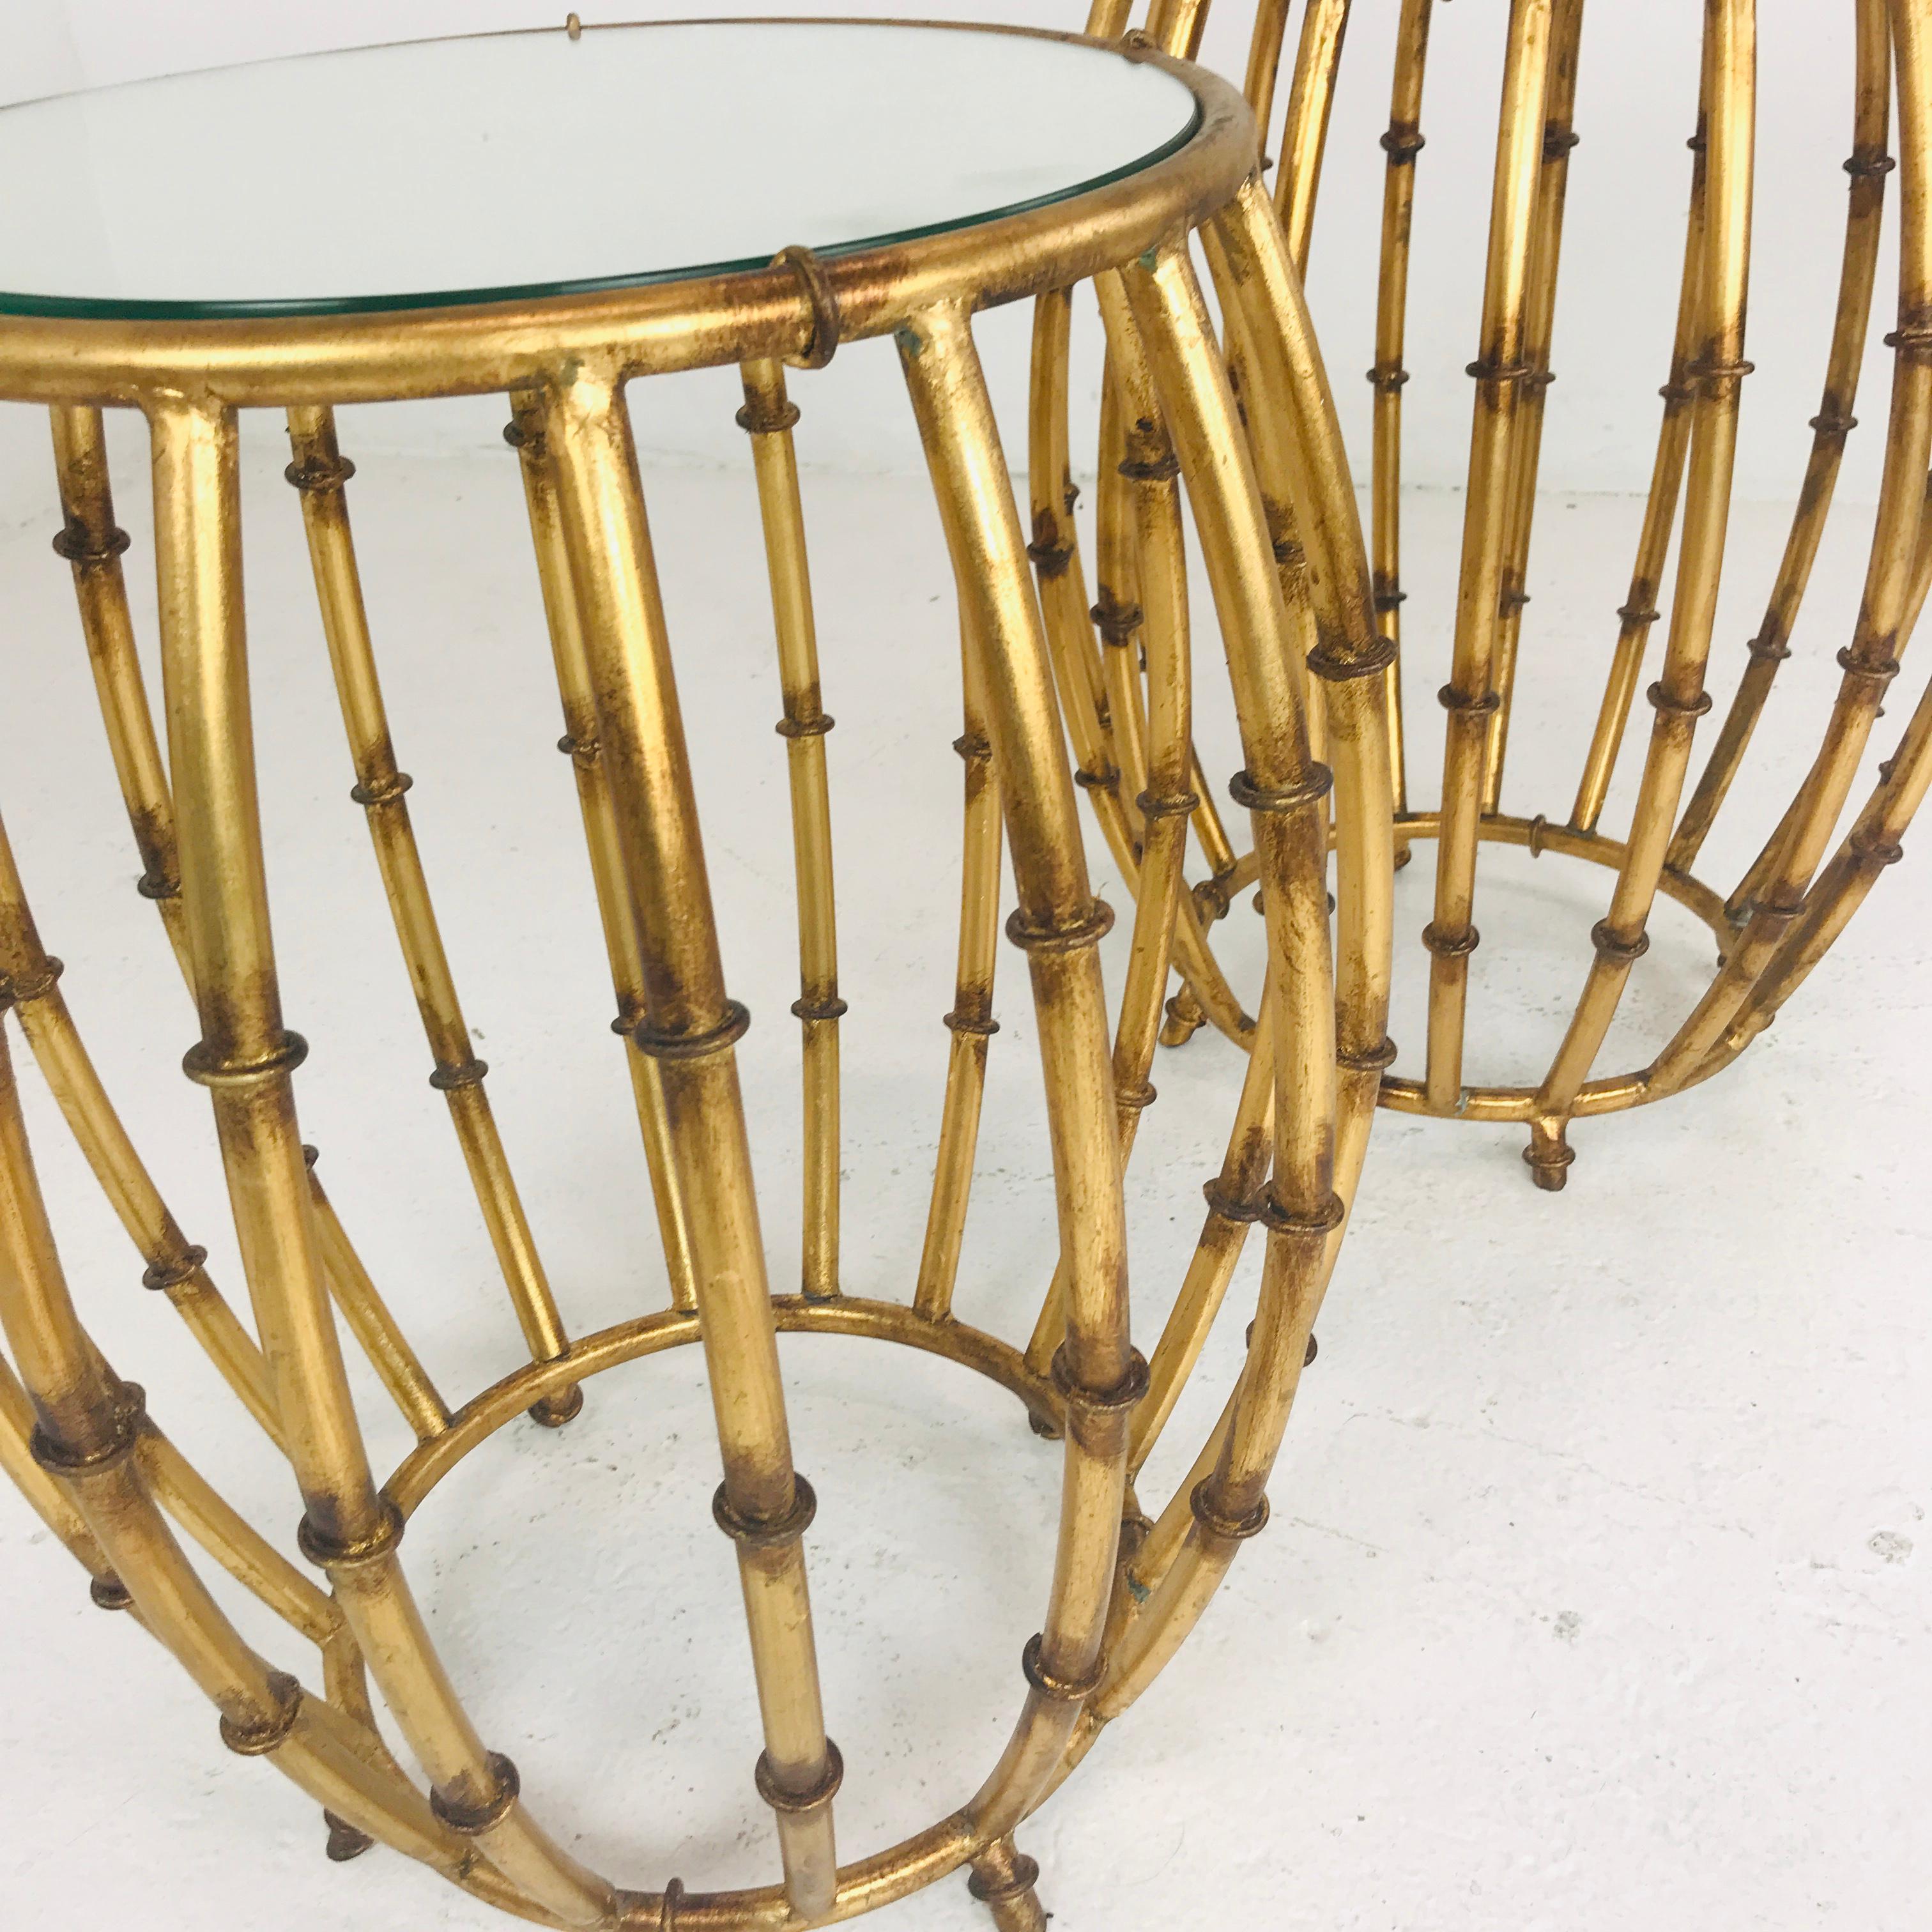 Pair of gold faux bamboo drum side tables with mirrored top
Diameter of table is 18